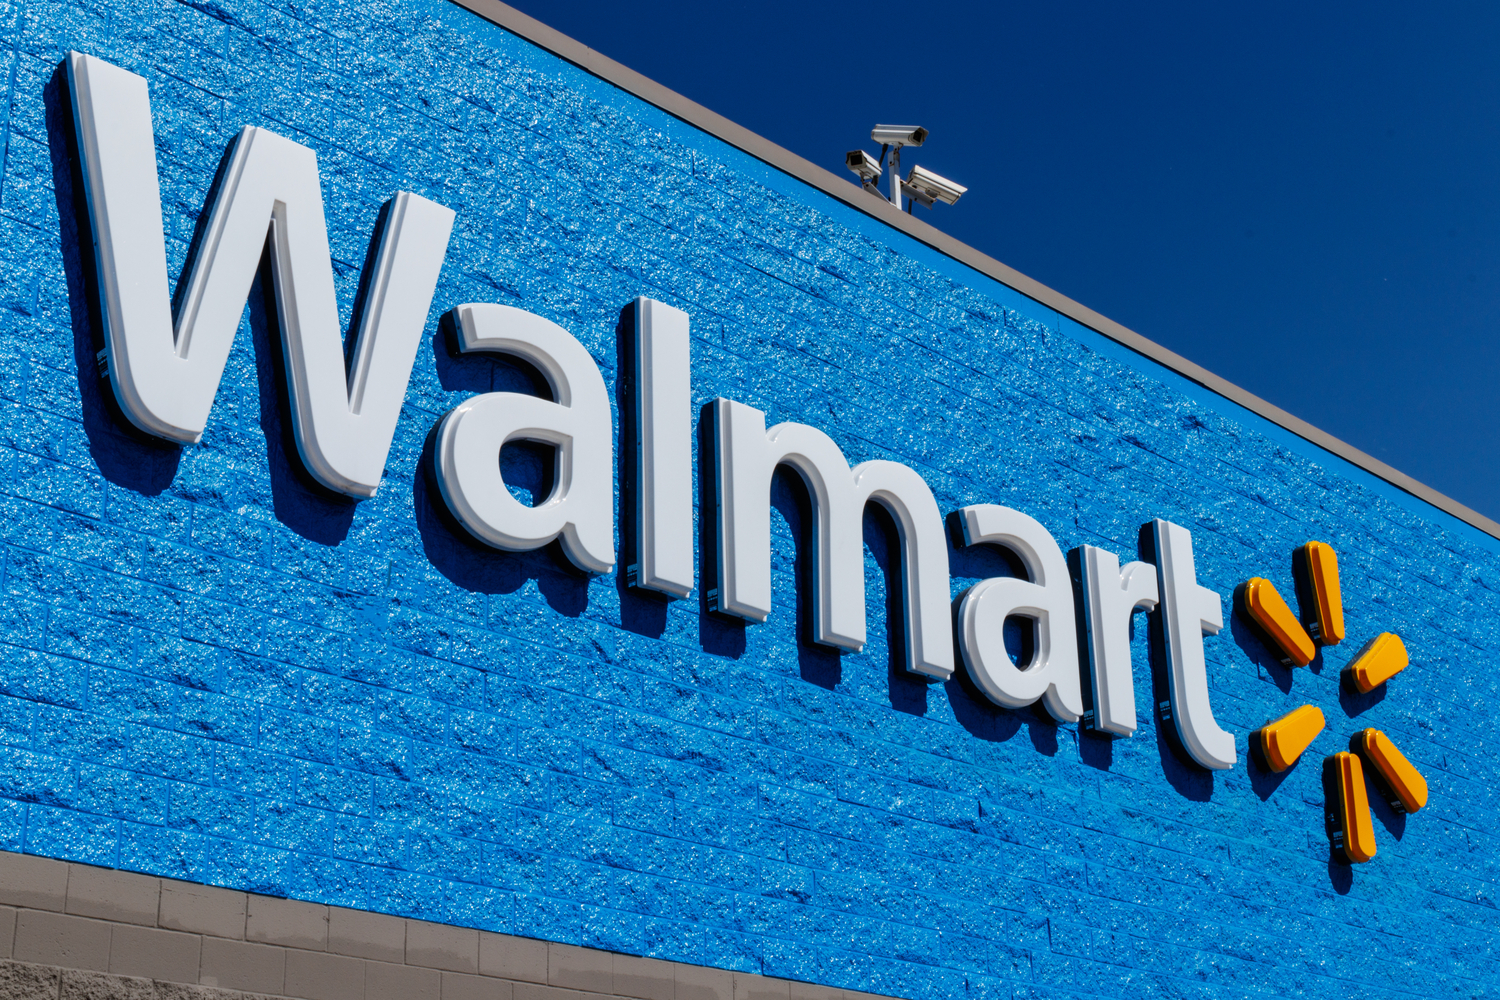 Walmart Wants To Patent A Stablecoin That Looks A Lot Like Facebook Libra